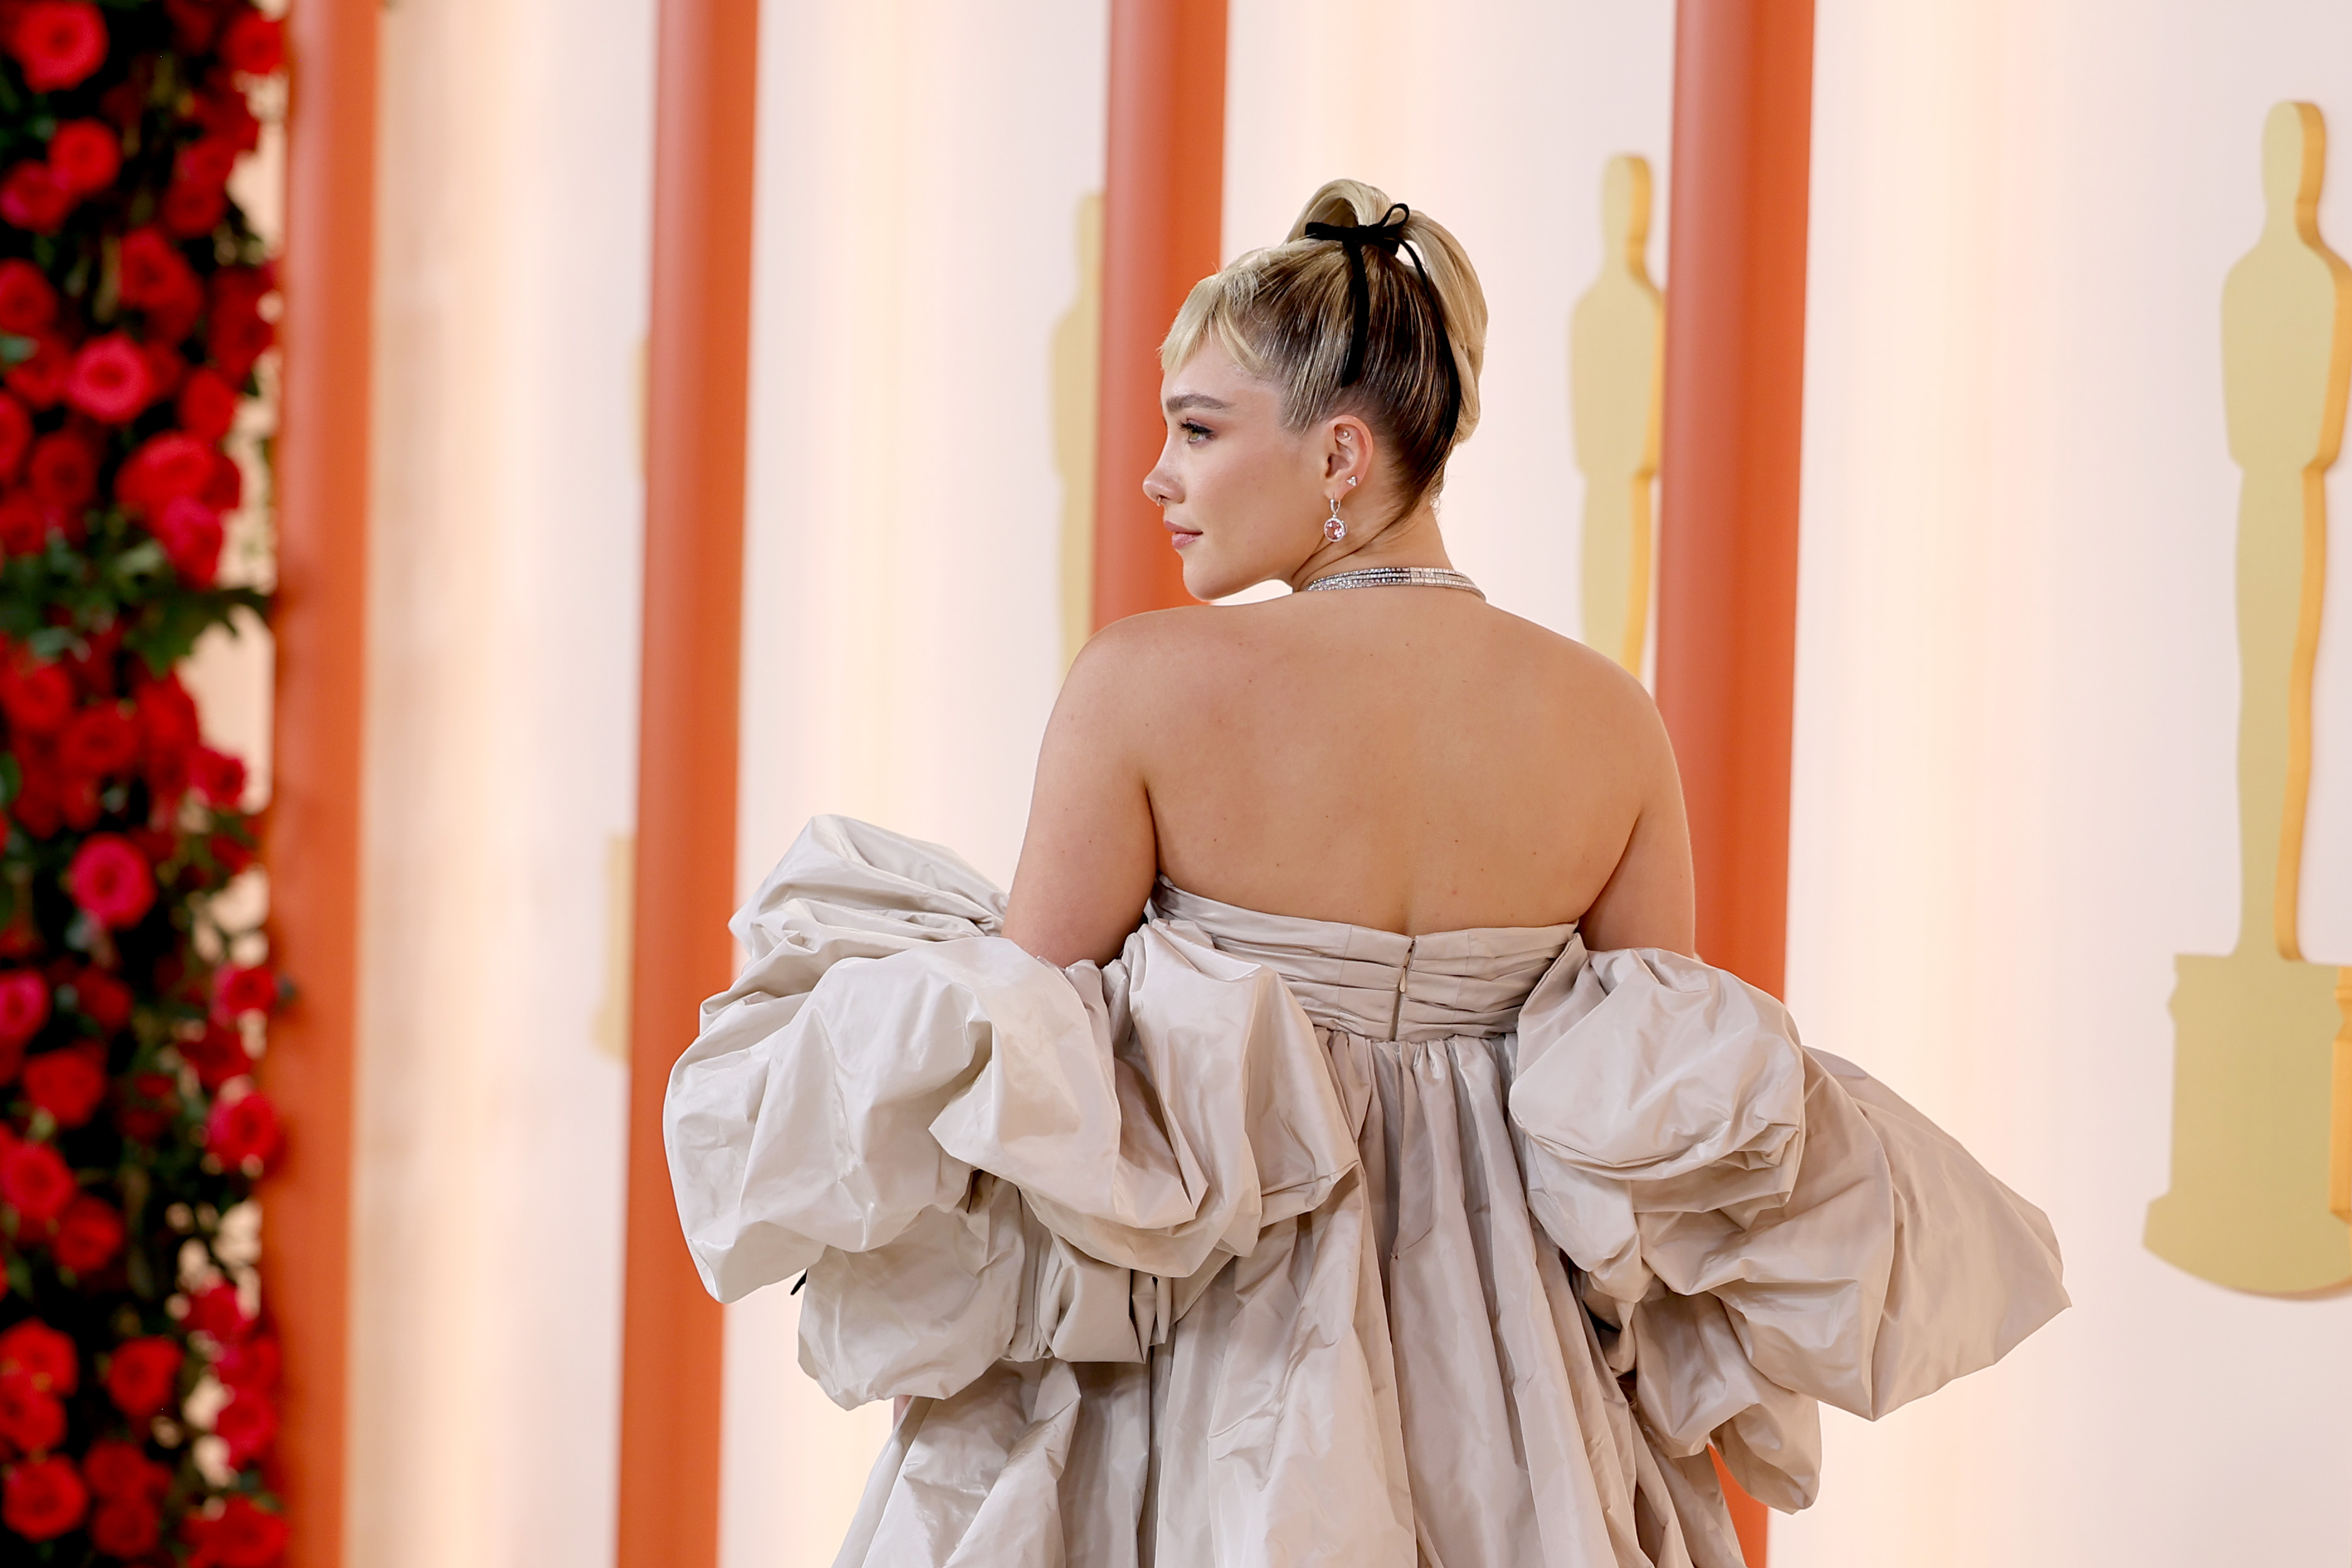 HOLLYWOOD, CALIFORNIA - MARCH 12: Florence Pugh attends the 95th Annual Academy Awards on March 12, 2023 in Hollywood, California. (Photo by Mike Coppola/Getty Images)